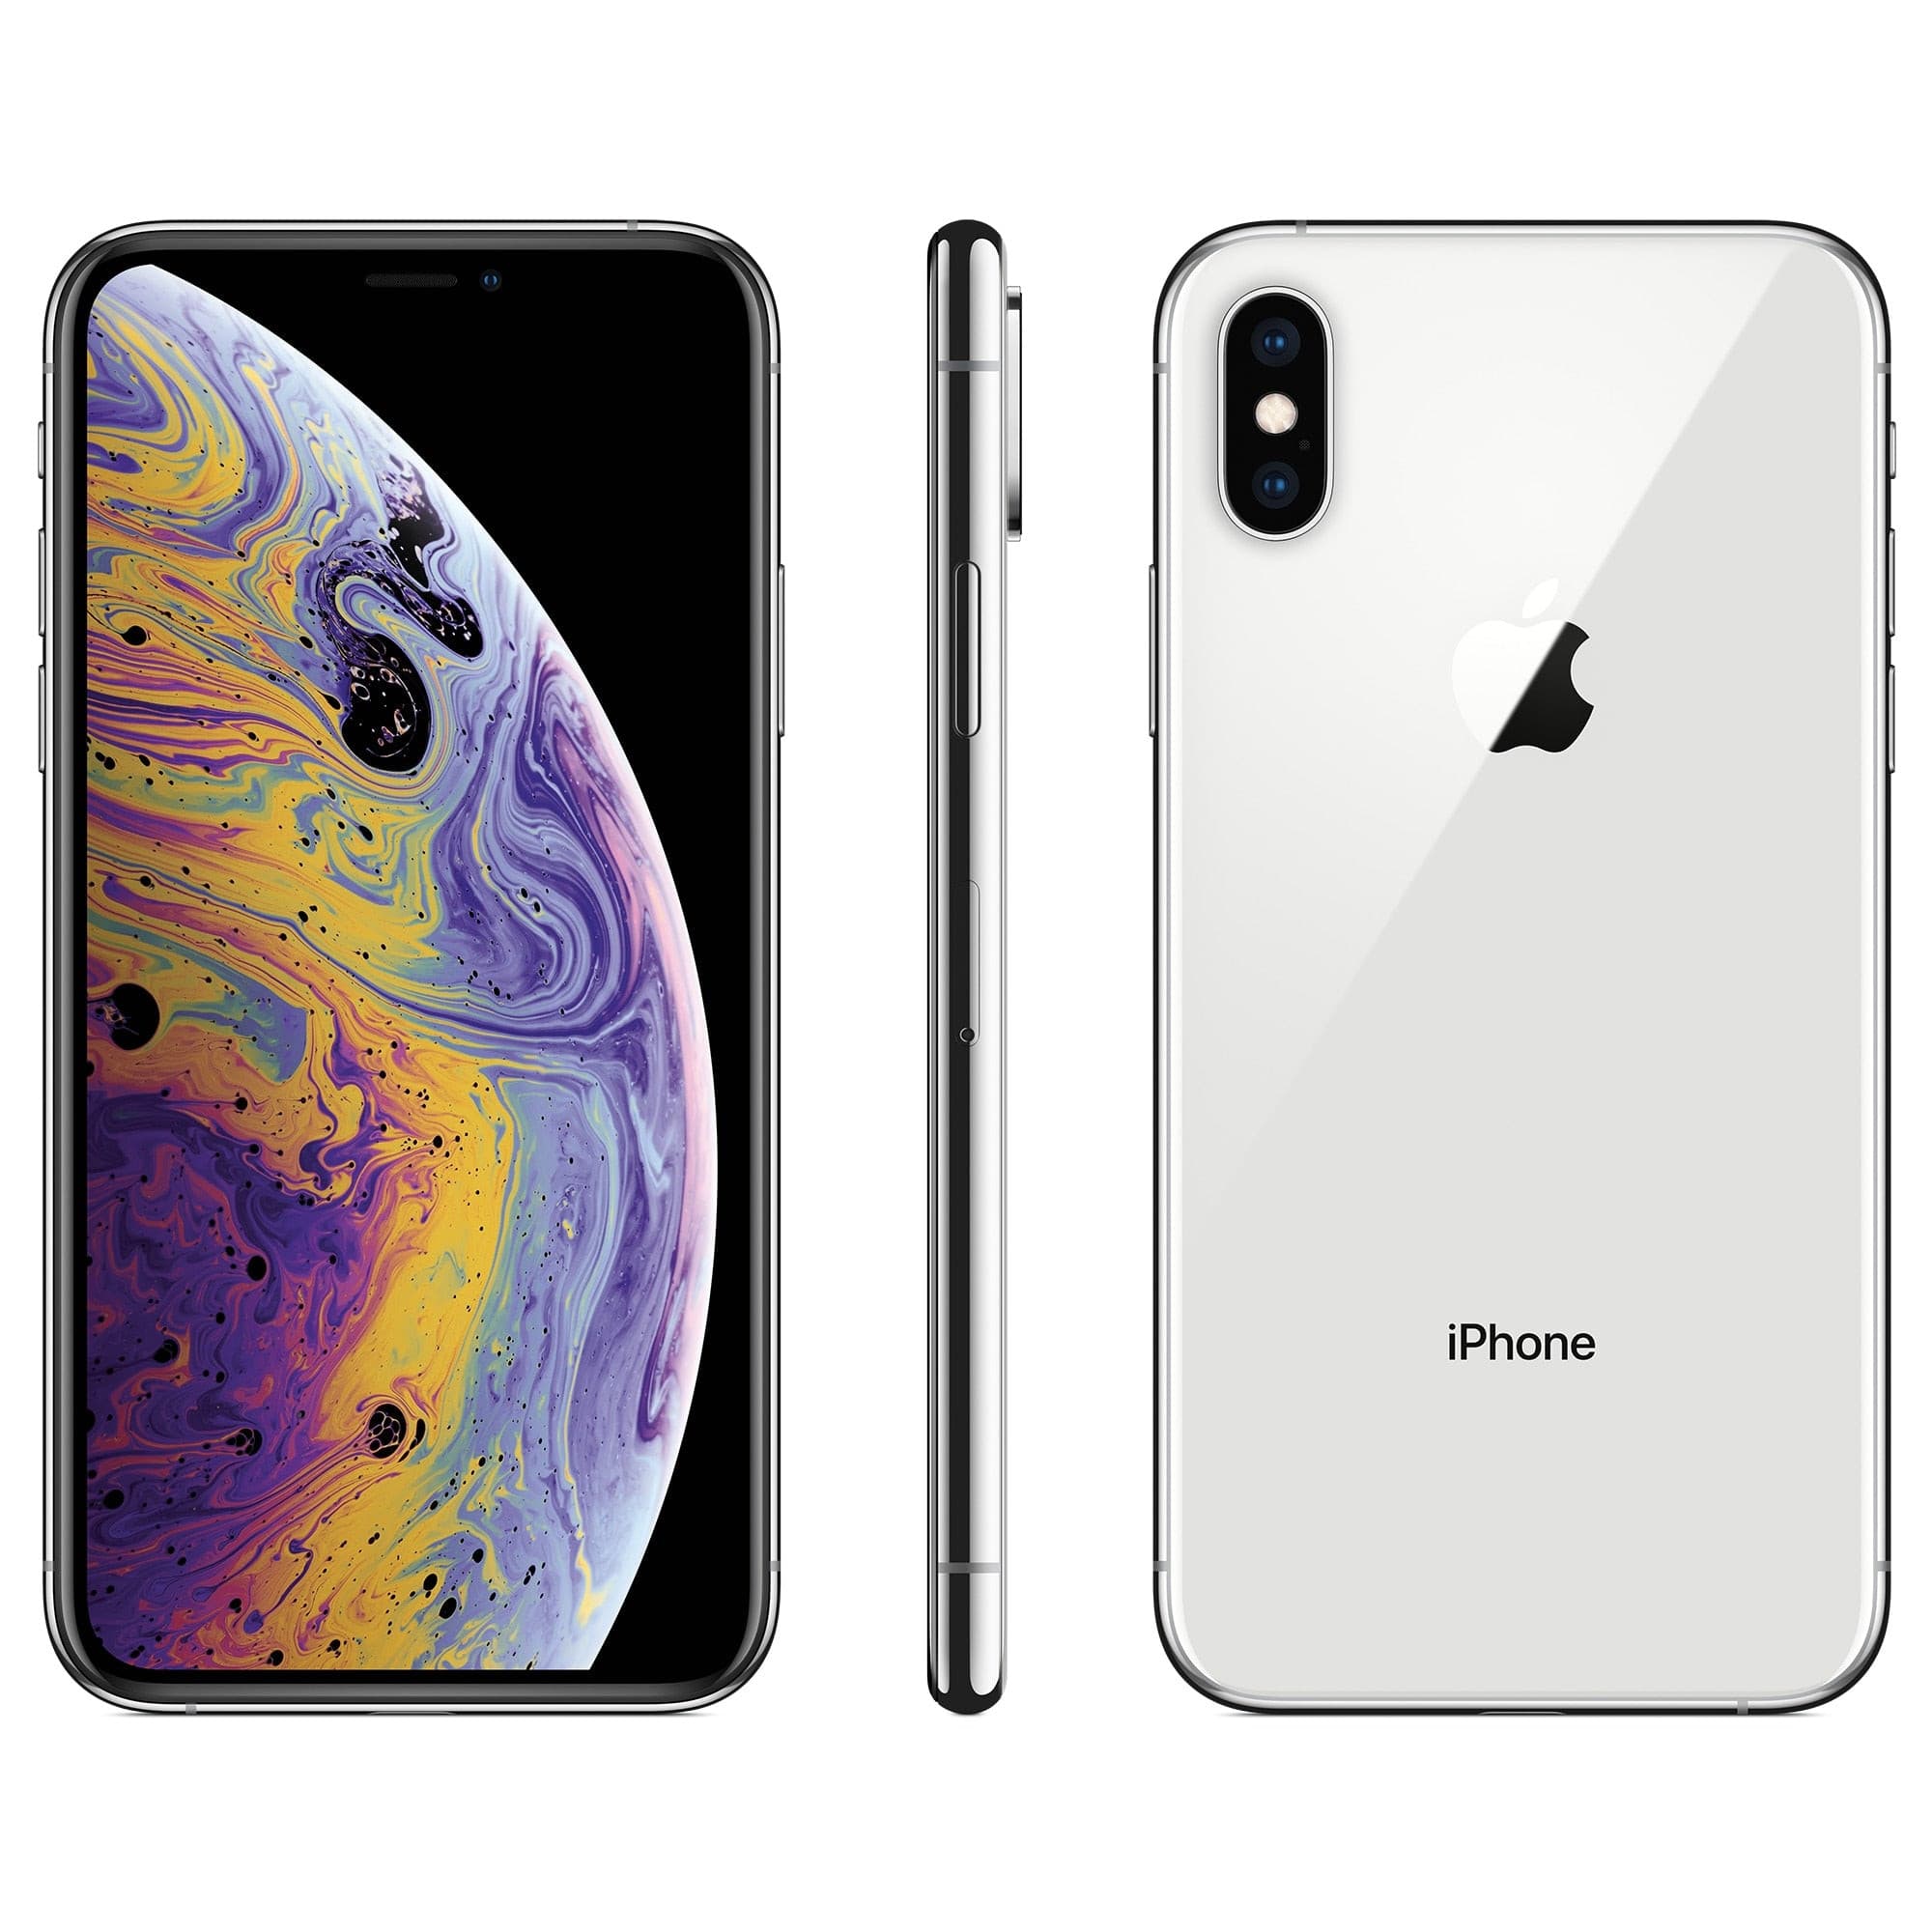 iPhone XS / iPhone XS Max 4G LTE Face ID Brand New Condition.